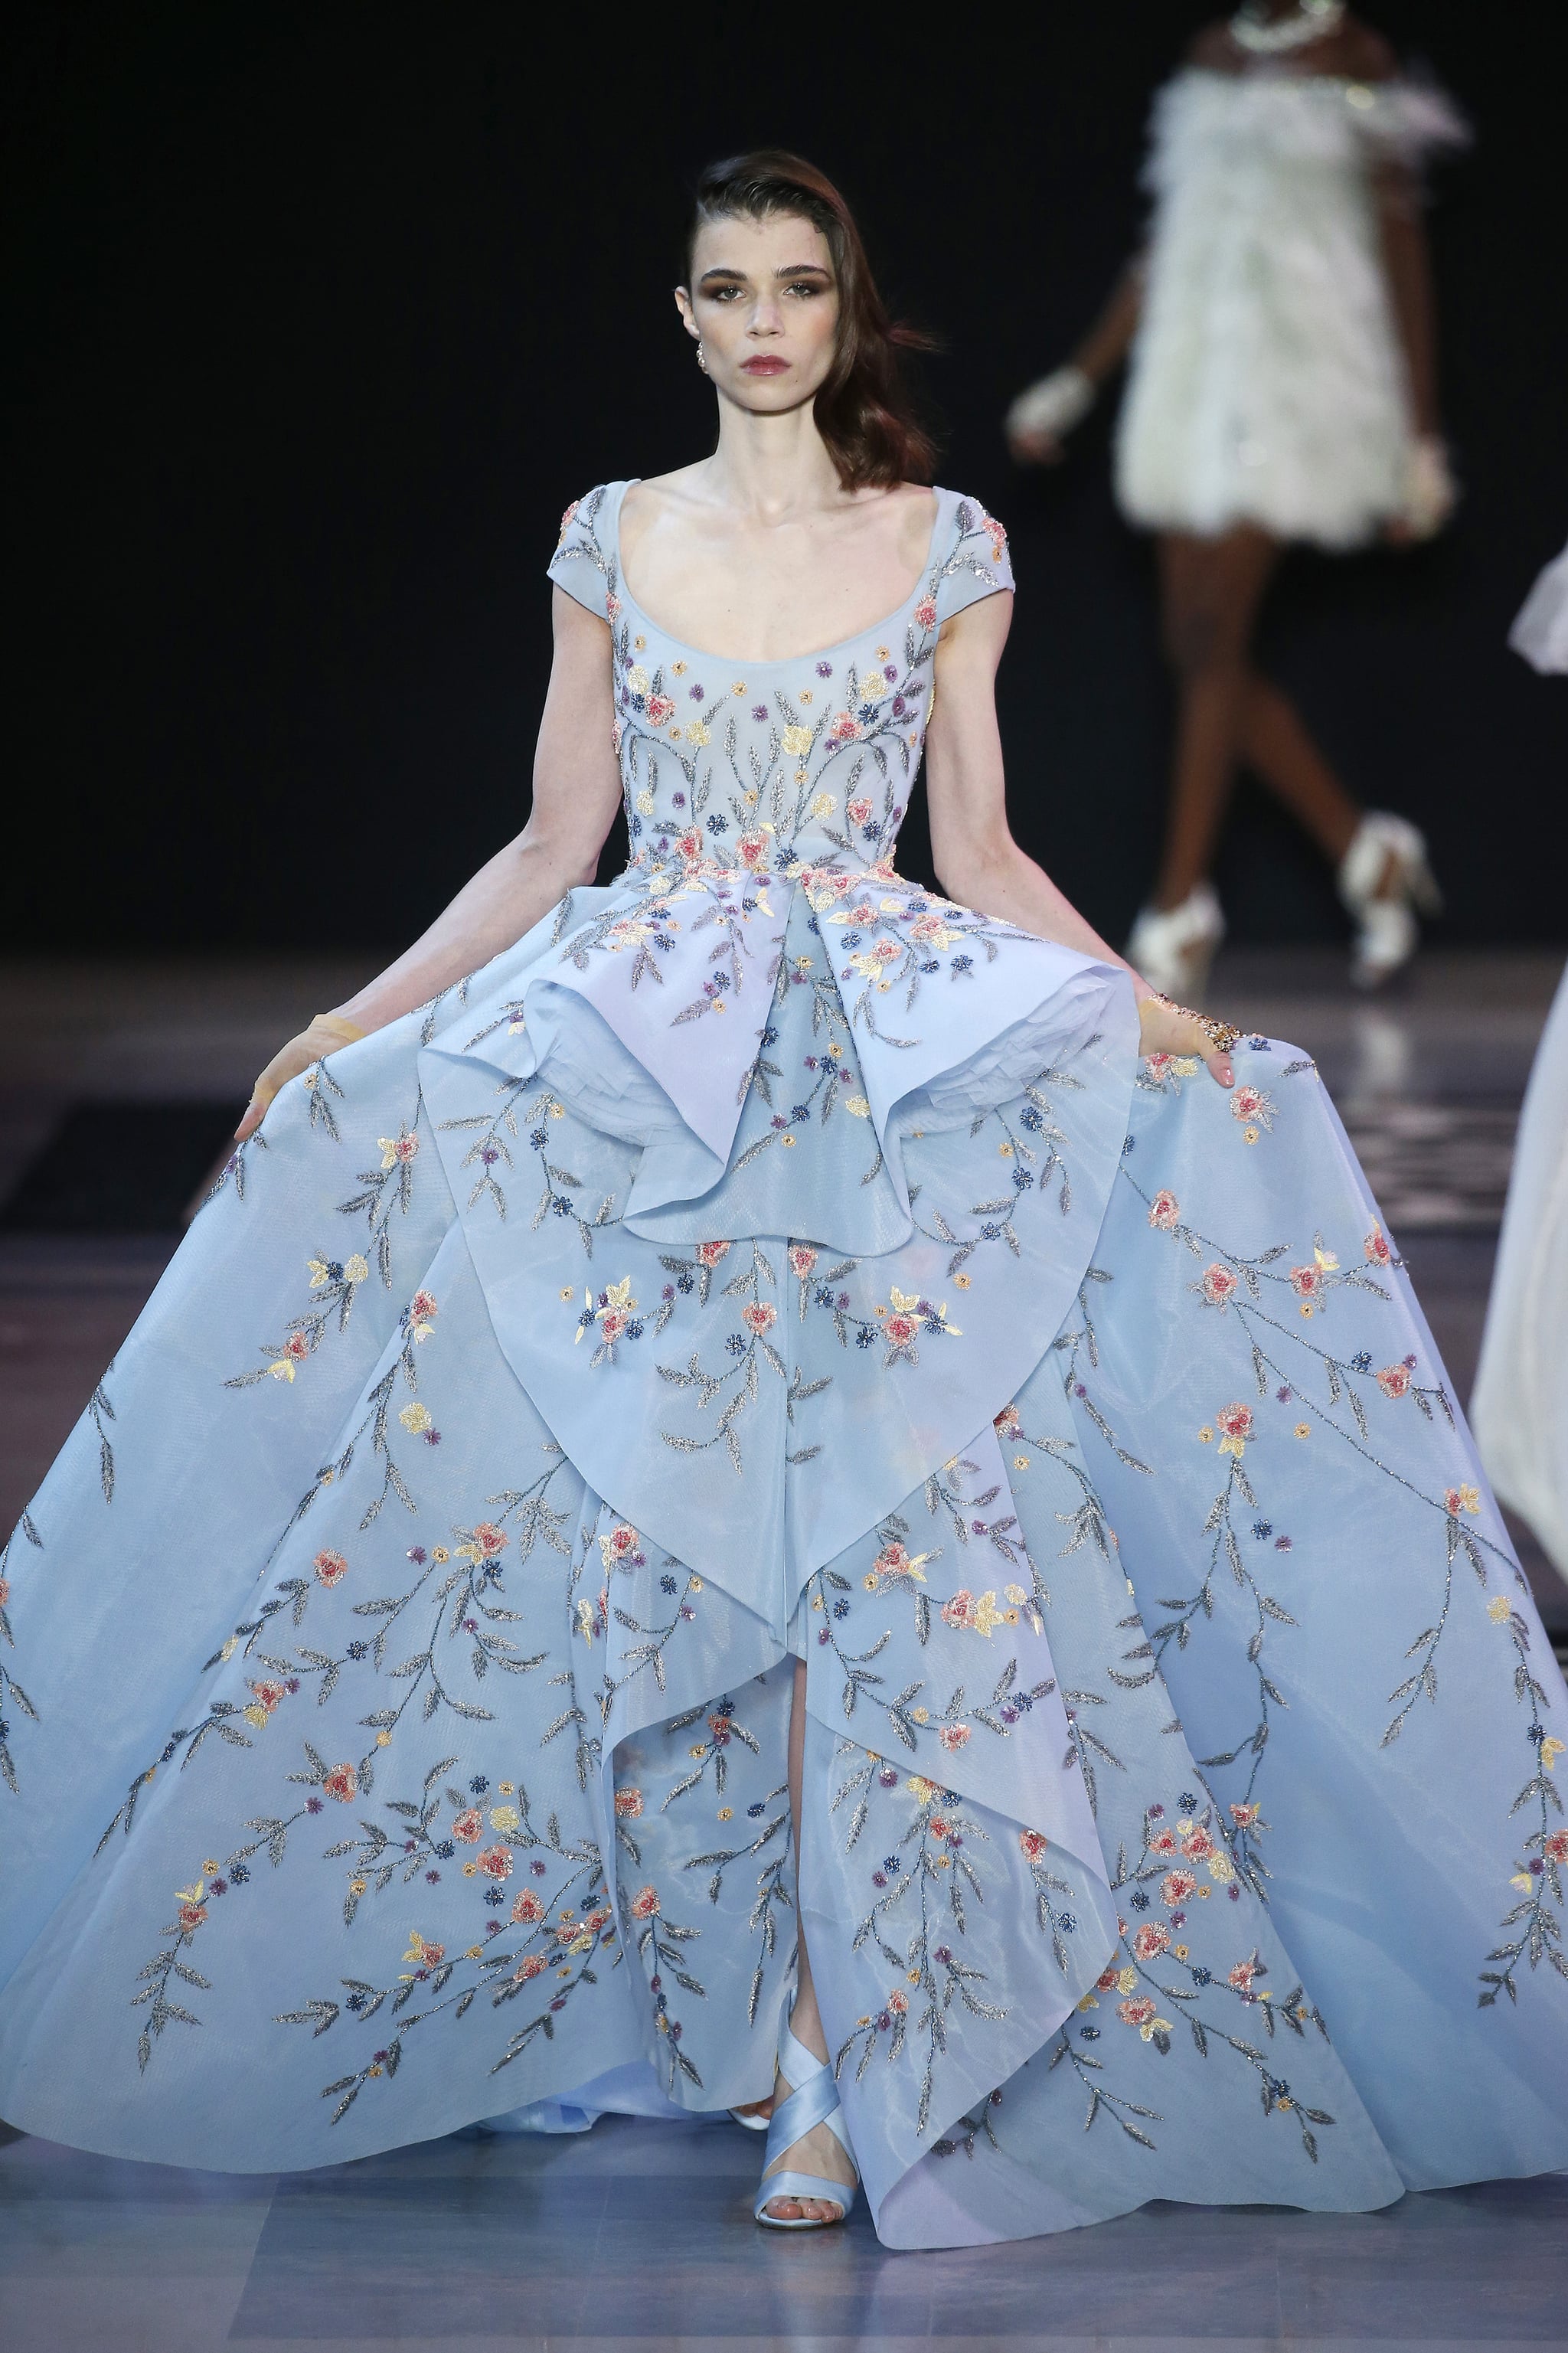 Georges Hobeika Haute Couture Spring Summer 2019 | The Couture Gowns We're  Waiting to See at the Oscars | POPSUGAR Fashion Photo 74